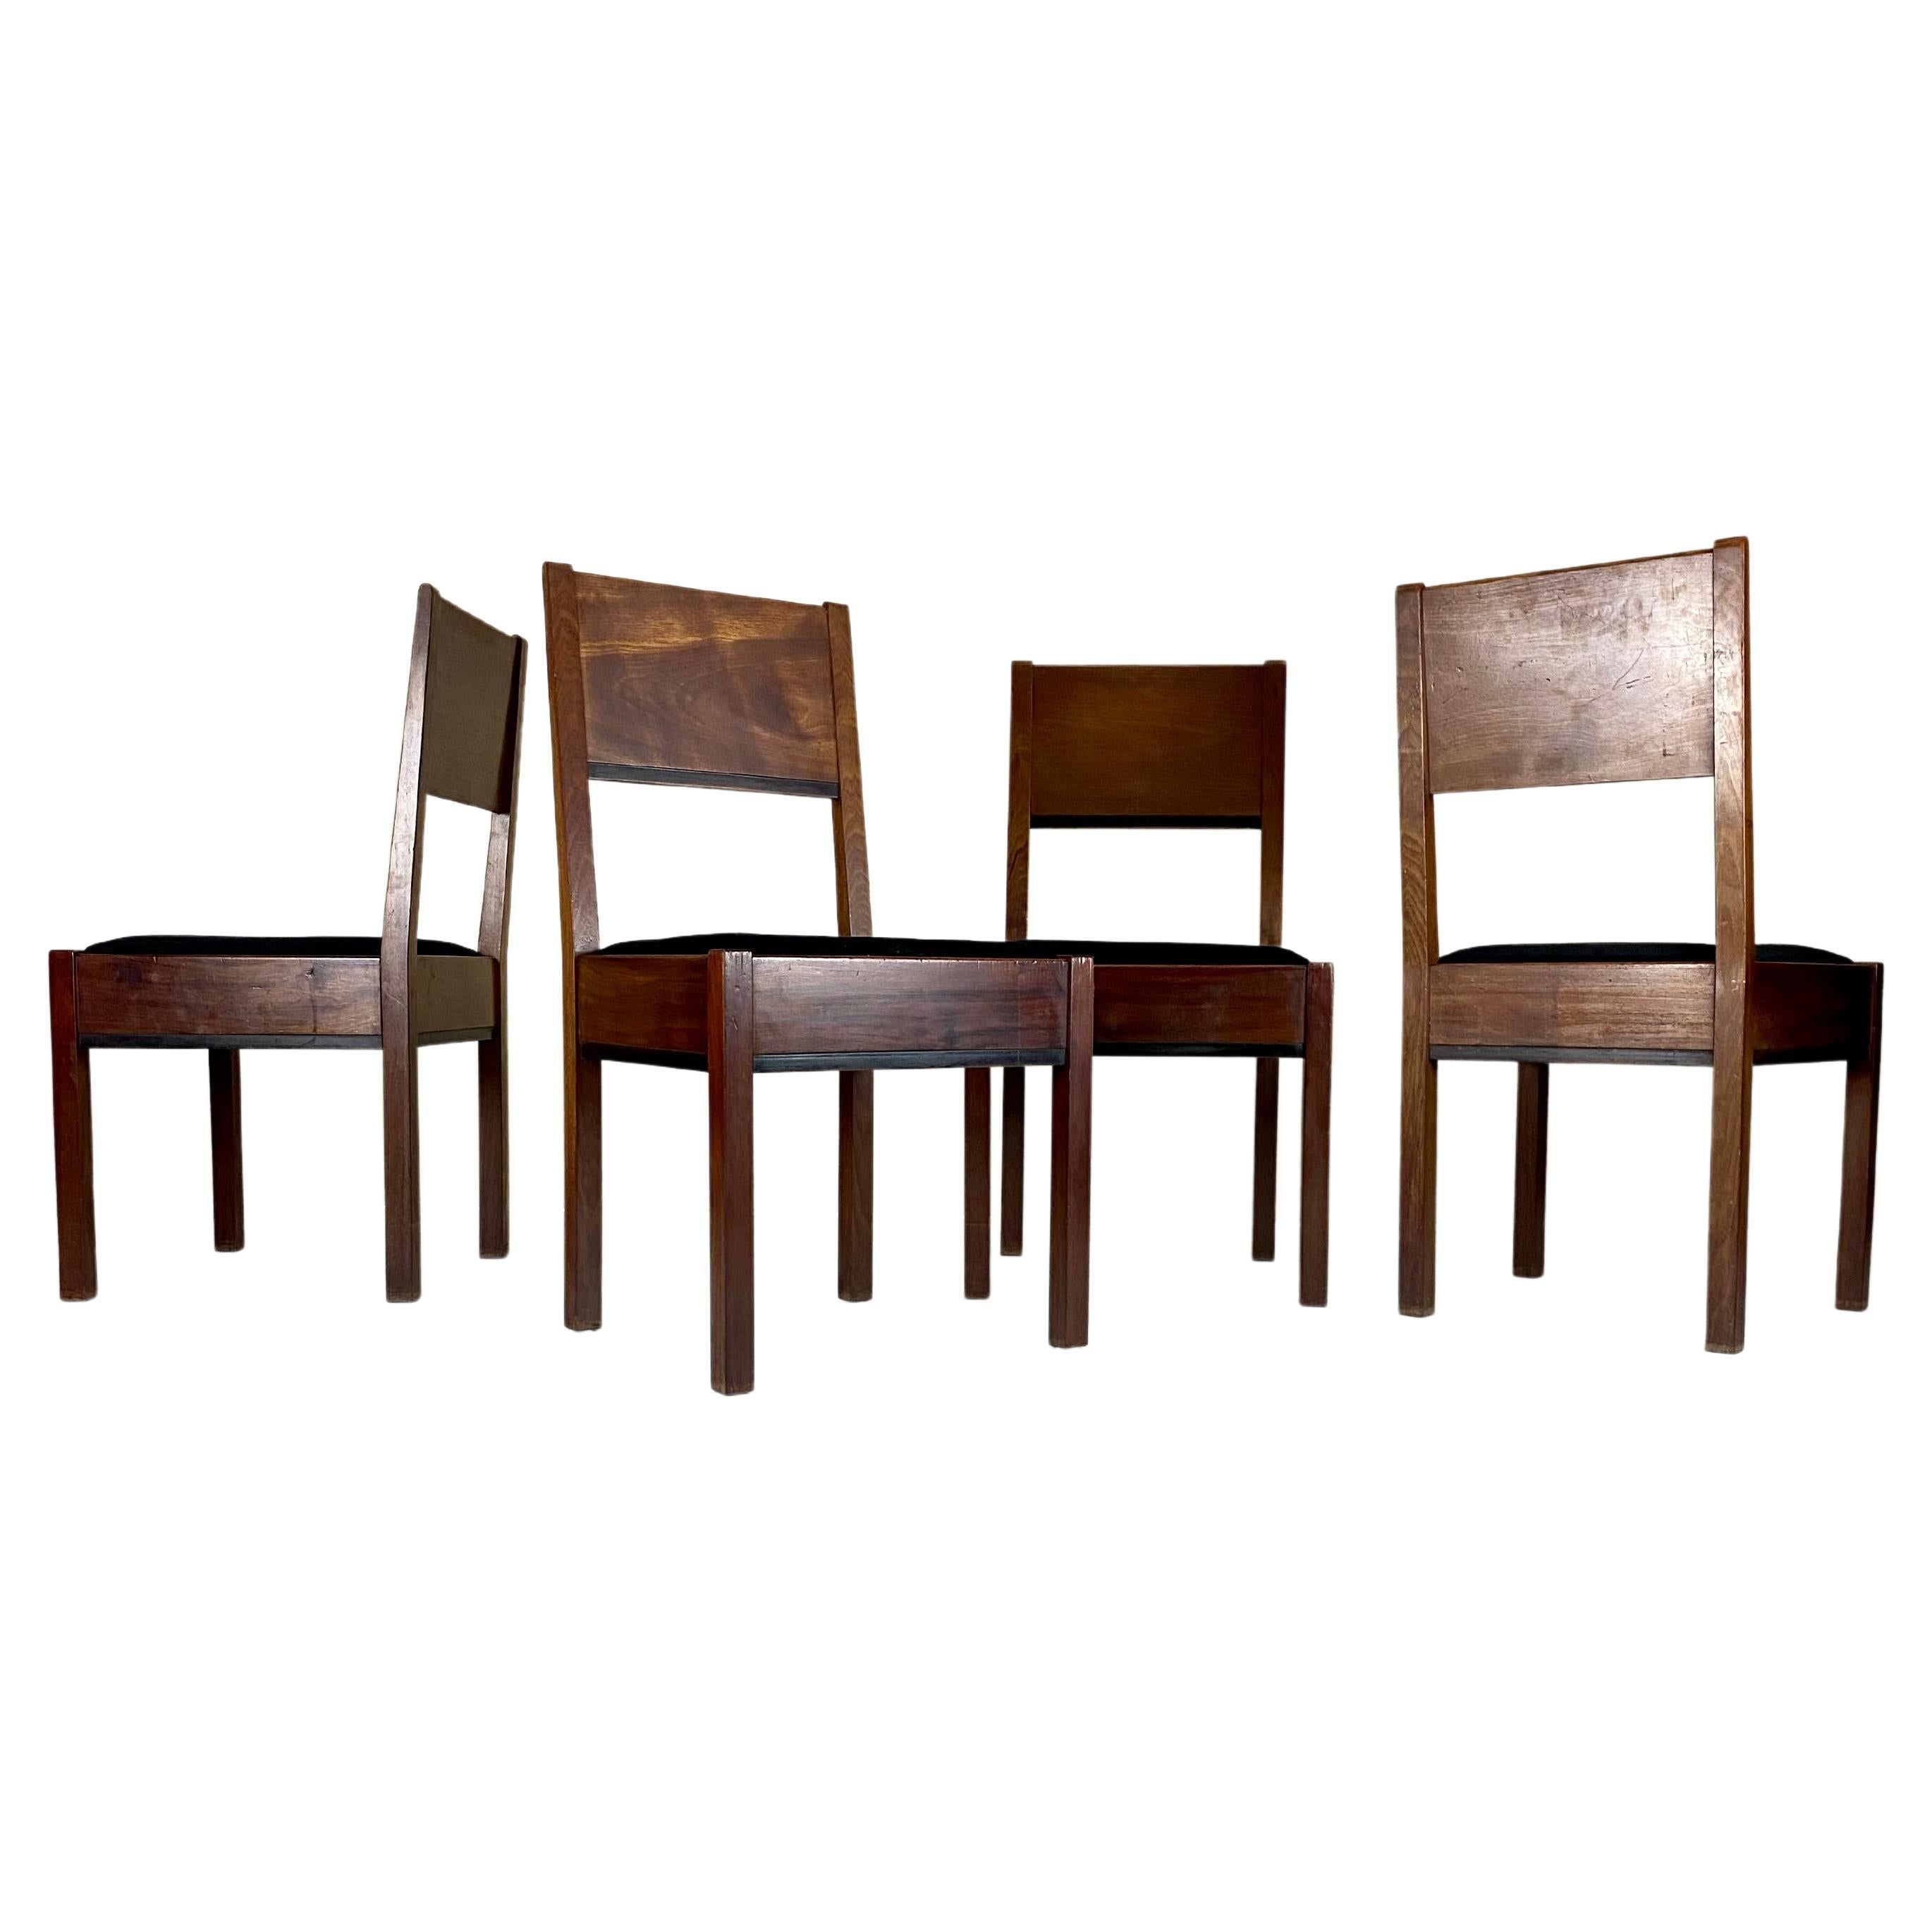 Set of 4 LOV Oosterbeek Chairs by J.A. Muntendam, 1920s, Hague School, Modernist For Sale